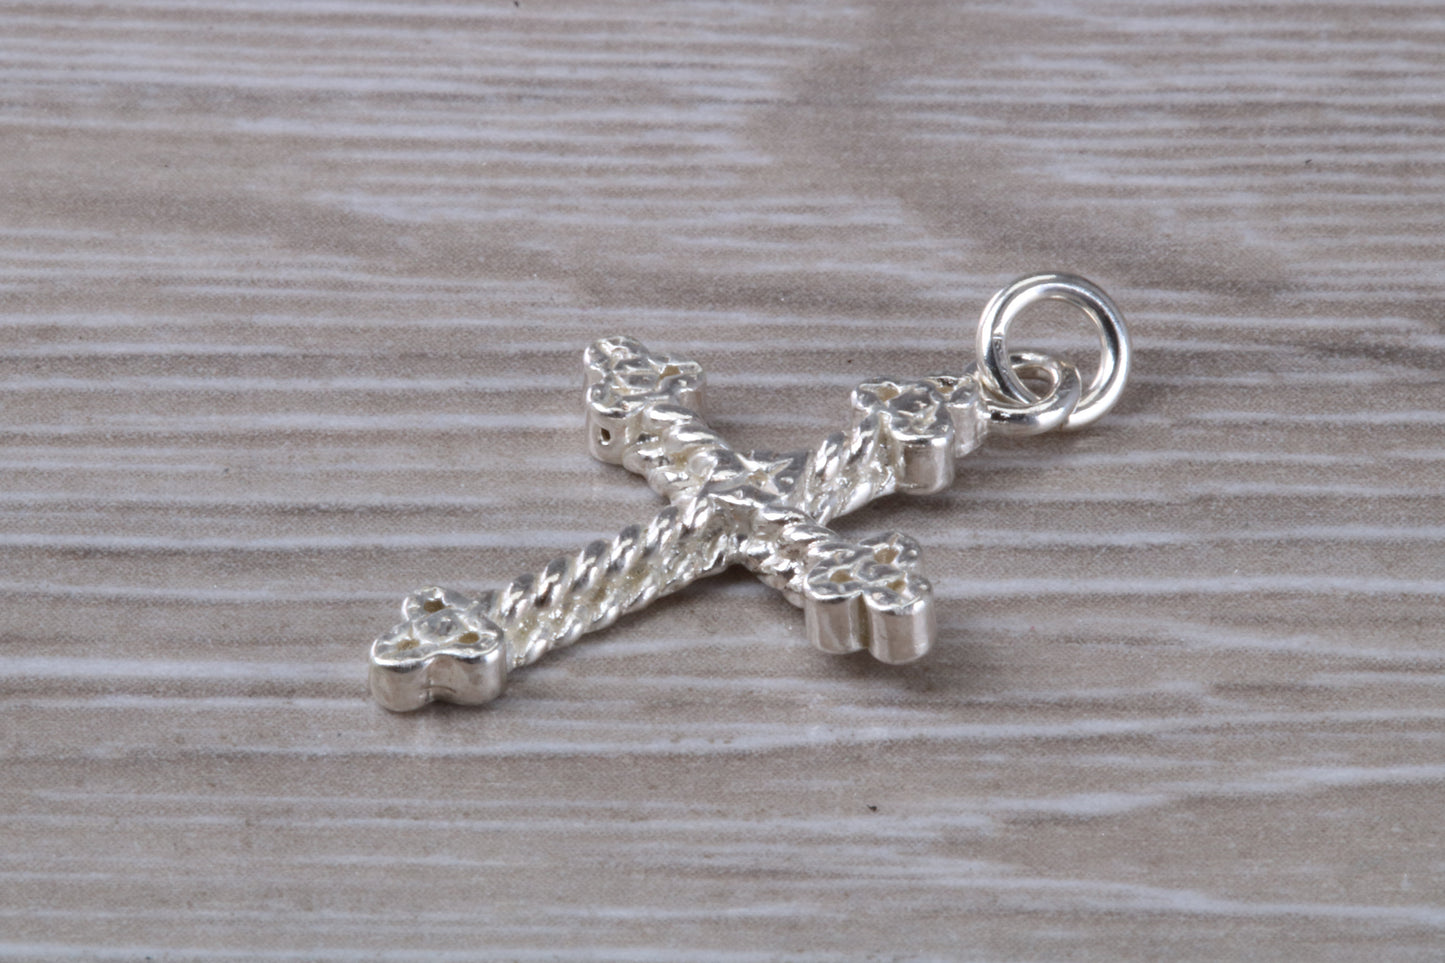 Small Ornate Cross Necklace